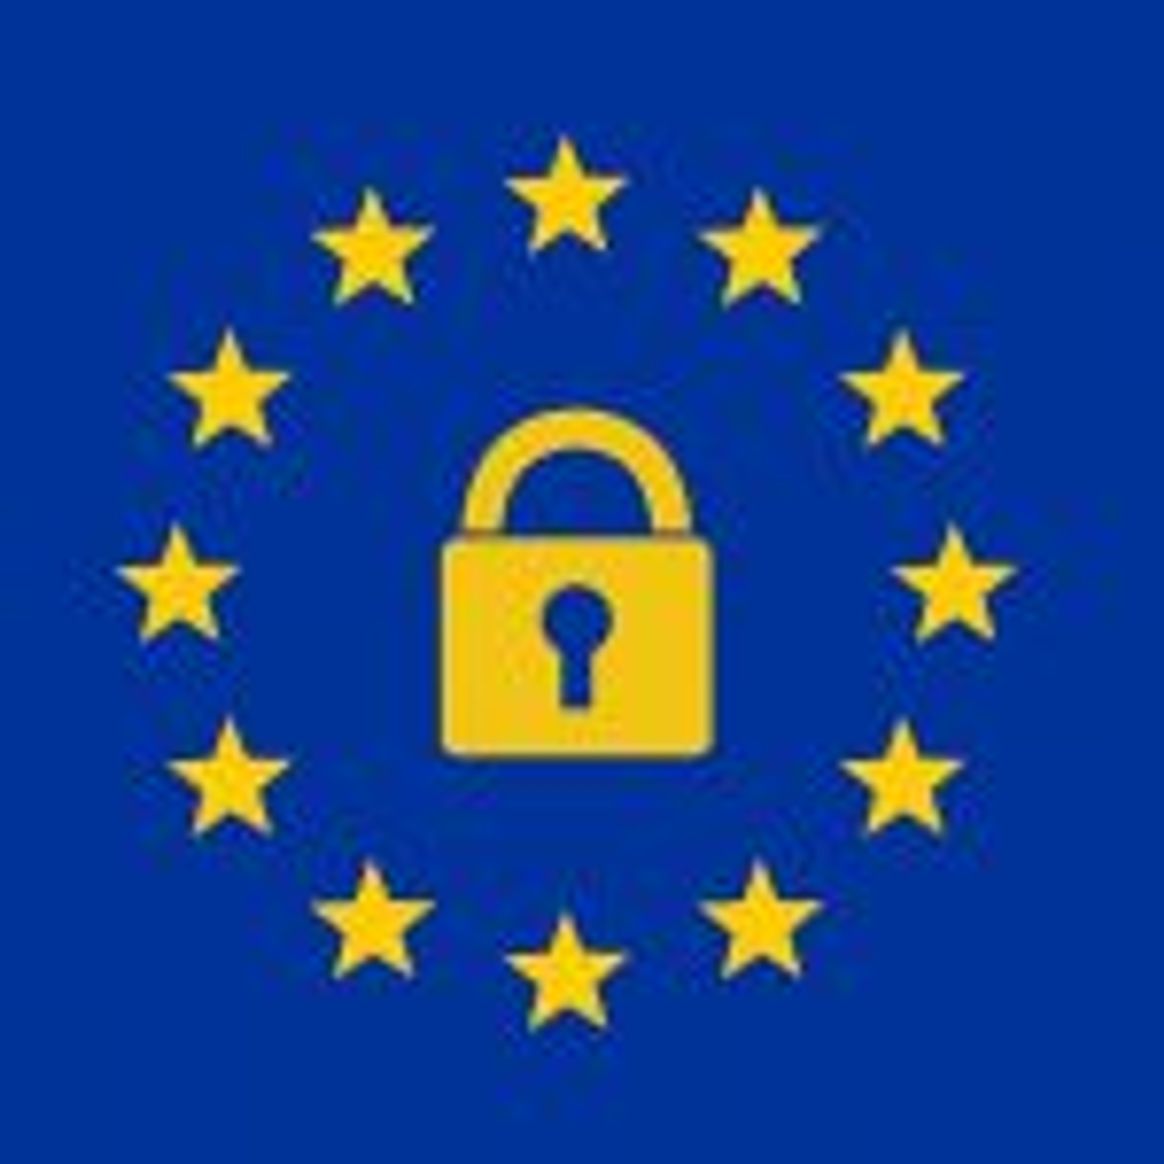 Personal Data of Experts and GDPR